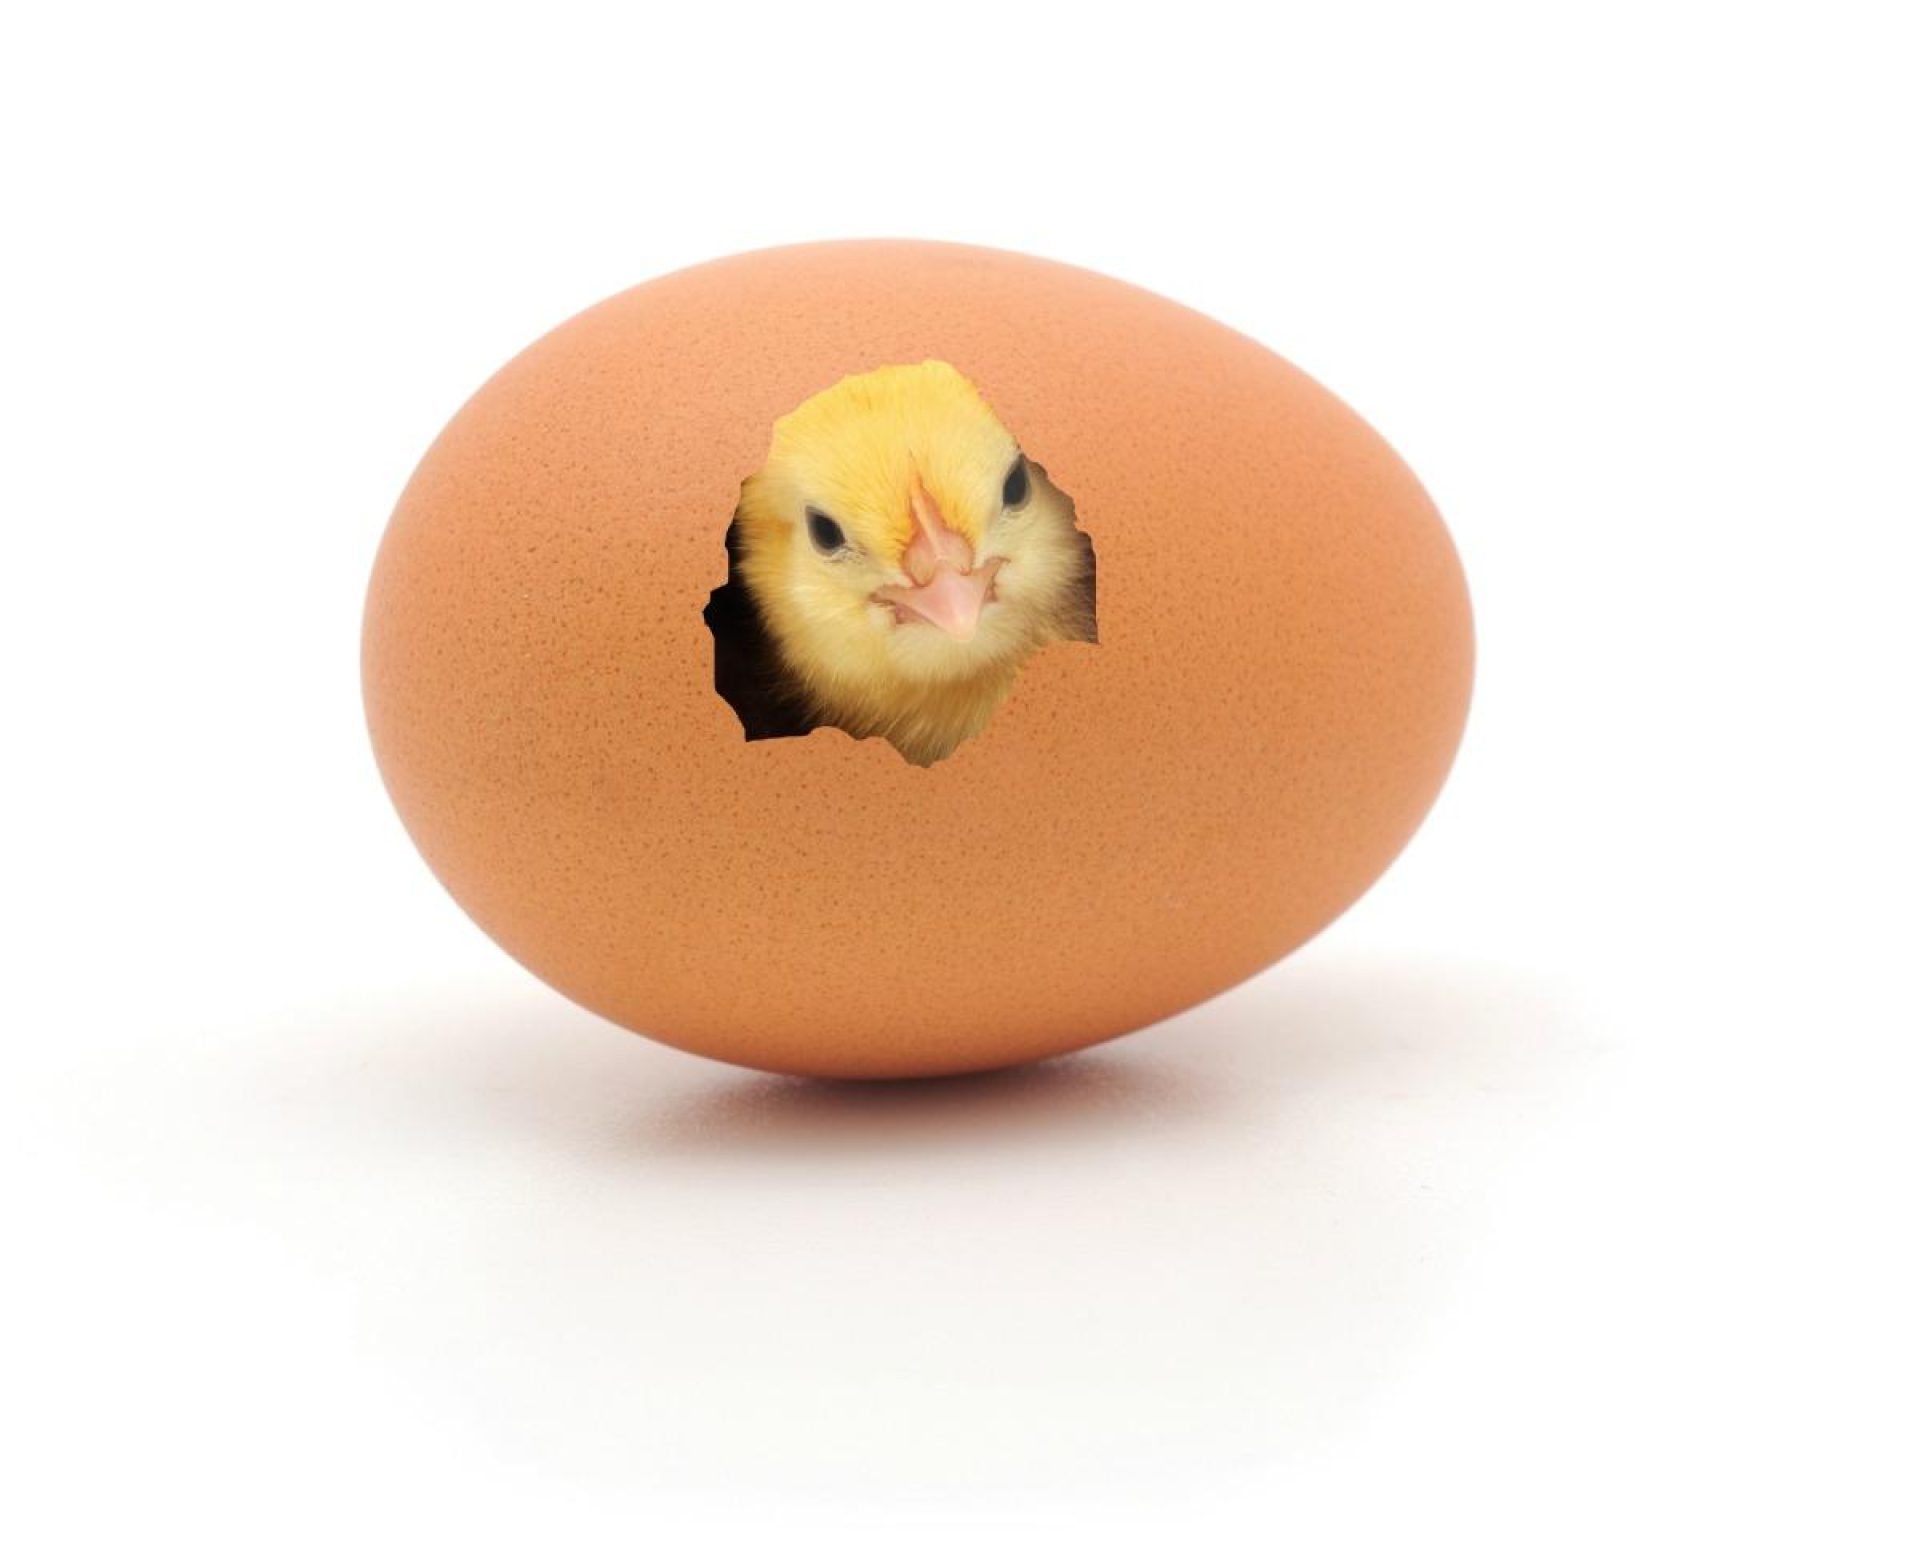 Chicken coming out of a brown egg